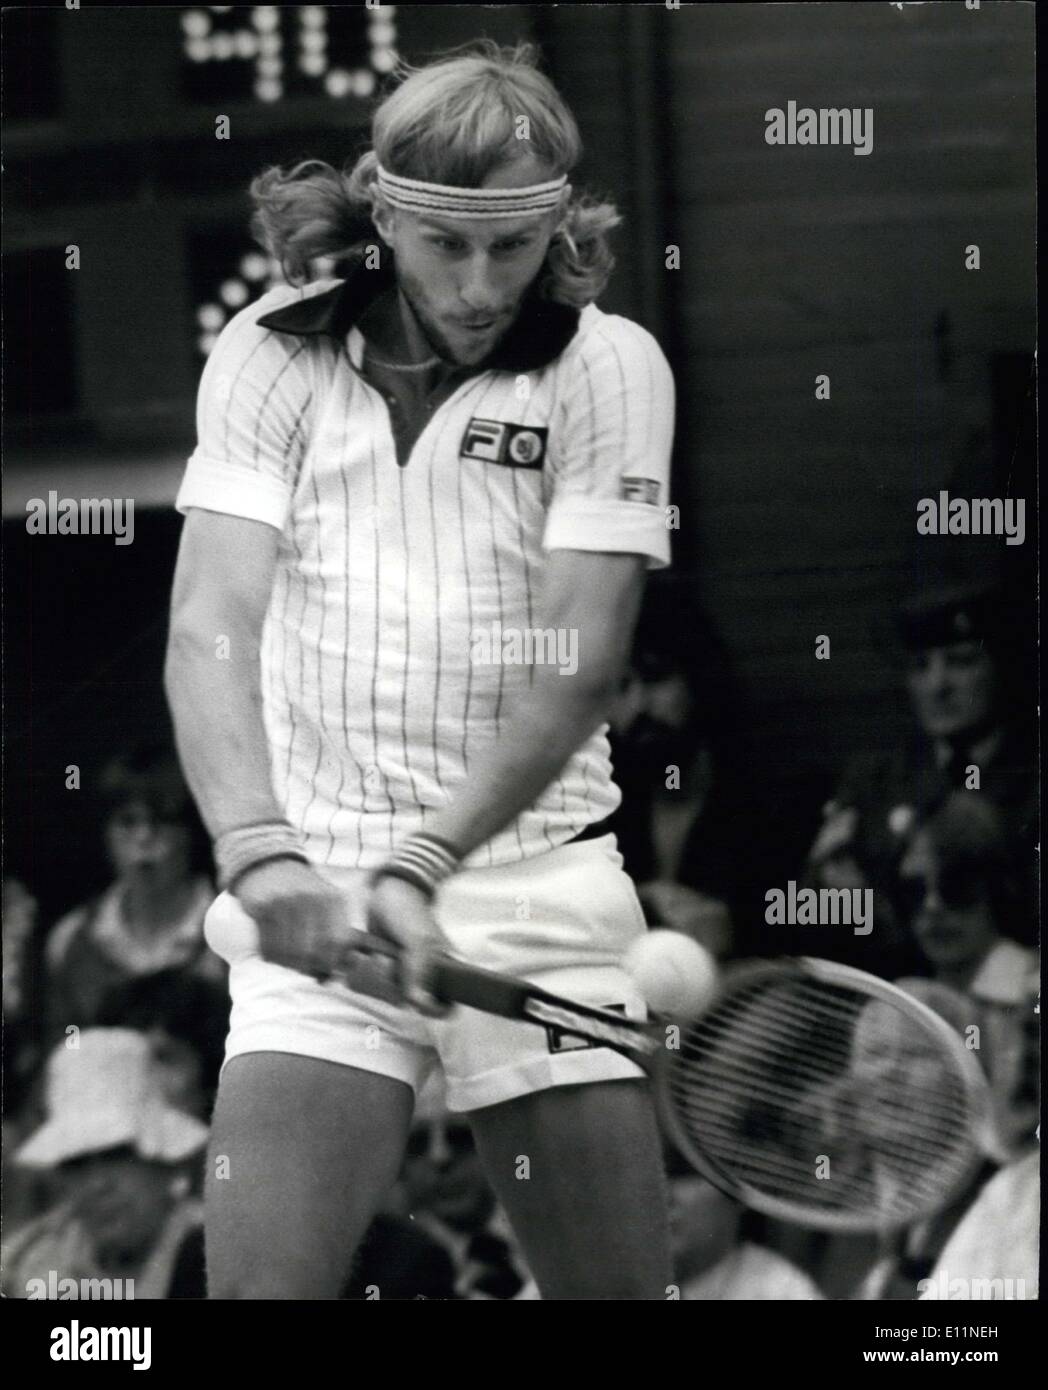 Jul. 07, 1979 - Bjorn Borg win Wimbledon for he fourth time in a row: Today on the Centre Court at Wimbledon, Bjron Borg of Sweden won the Men's Singles title for the fourth successive time when beating the American Rosco Tanner in five sets. Photo shows Bjorn Borg seen in action against Rosco Tanner on the centre court. Stock Photo